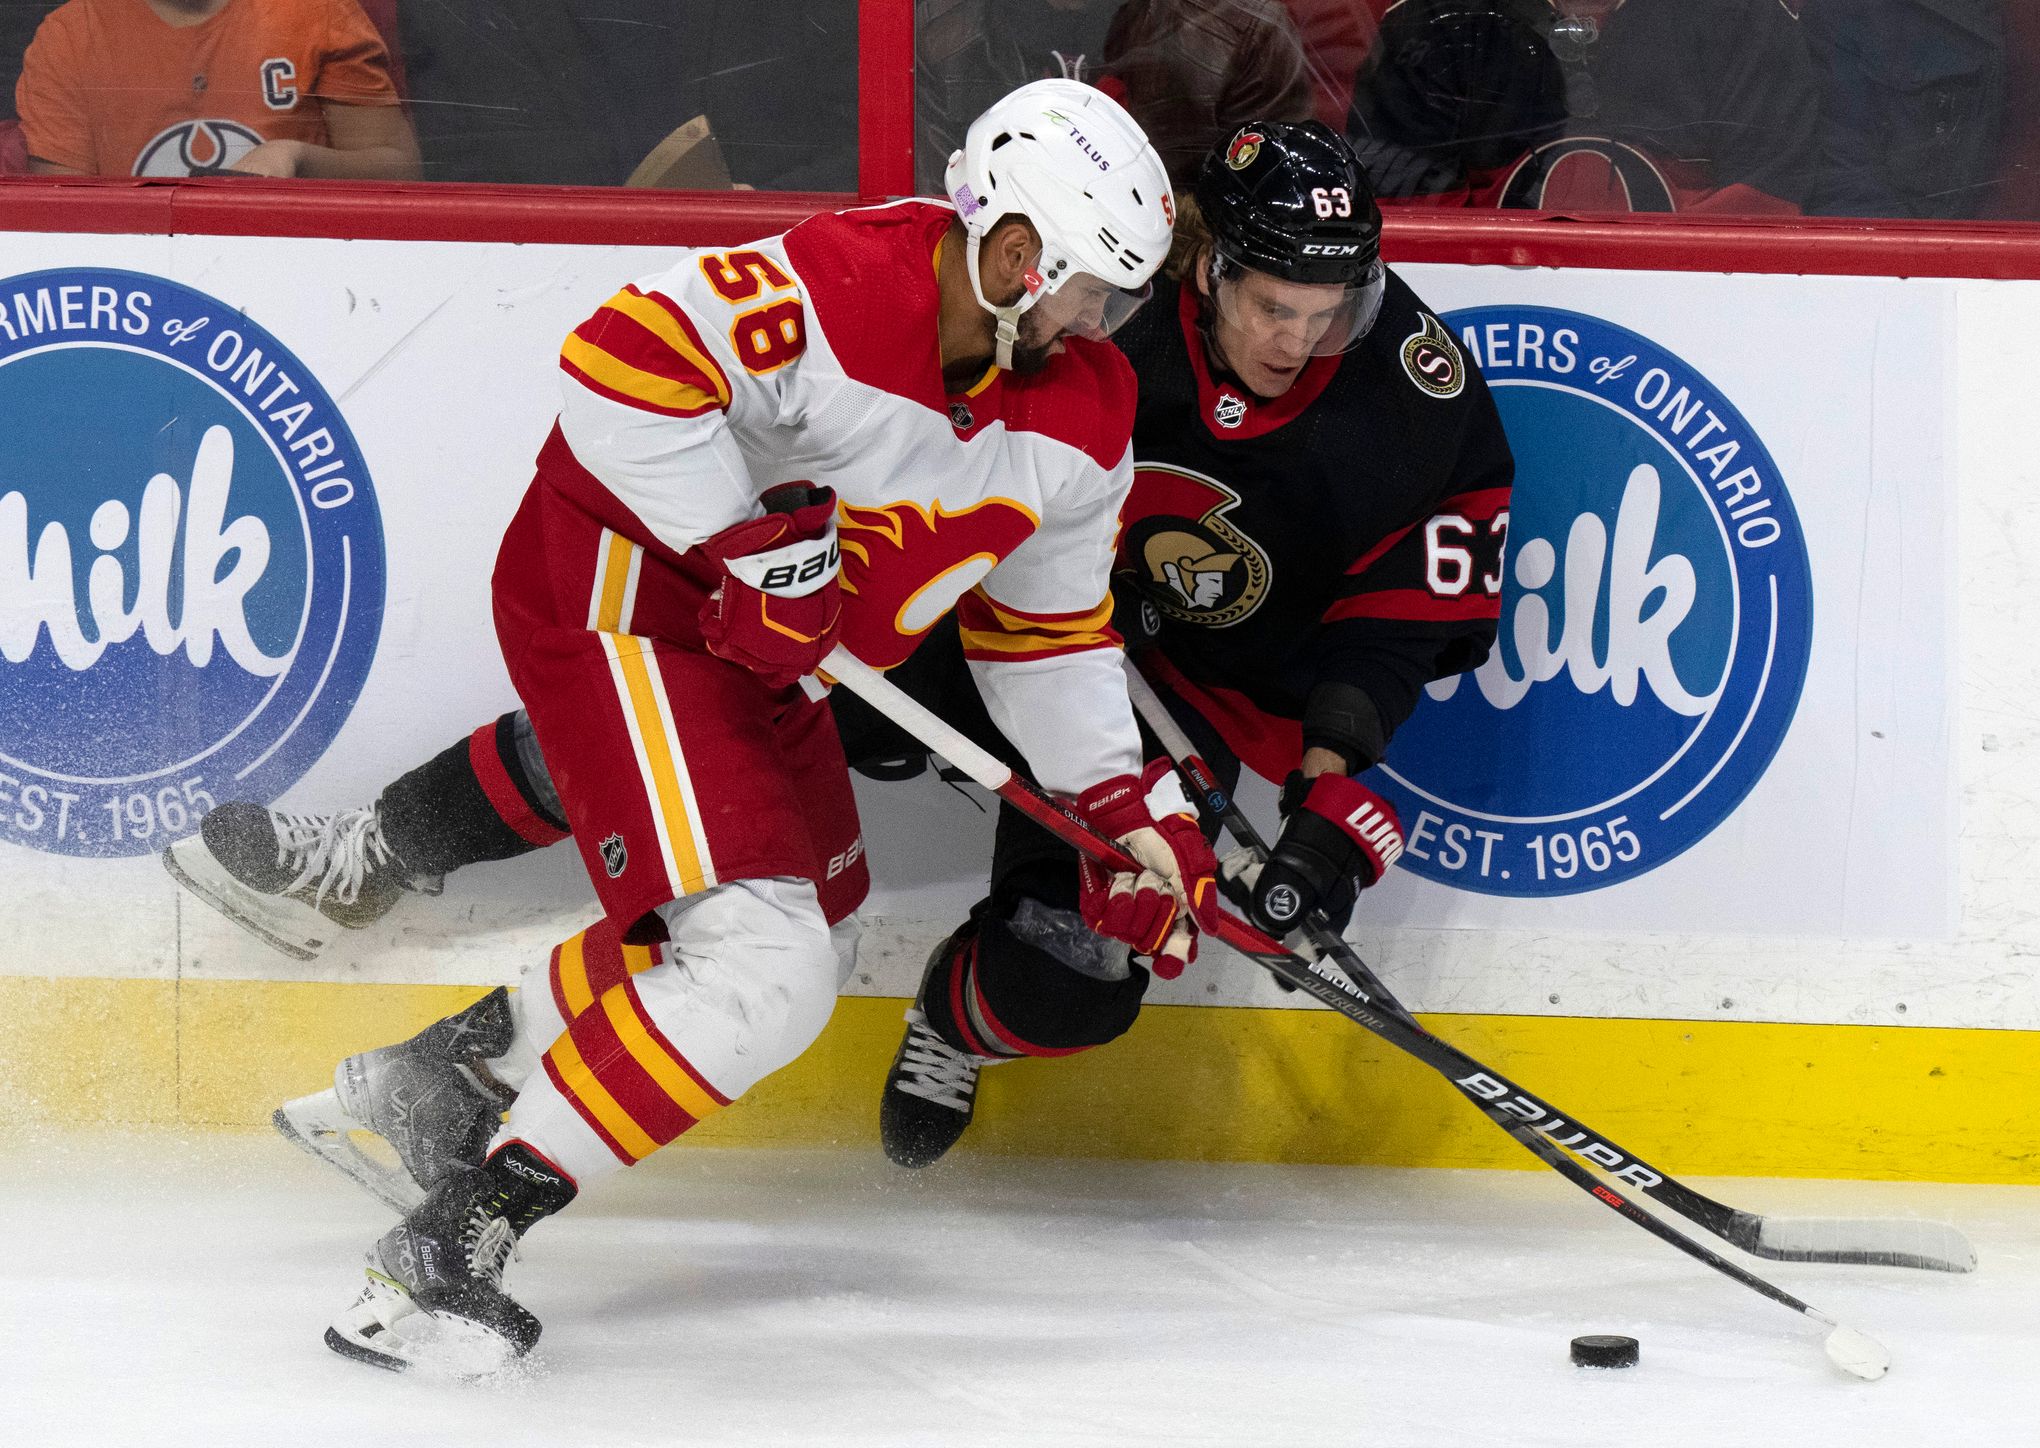 Rasmus Andersson making a point on the Calgary Flames first power play unit